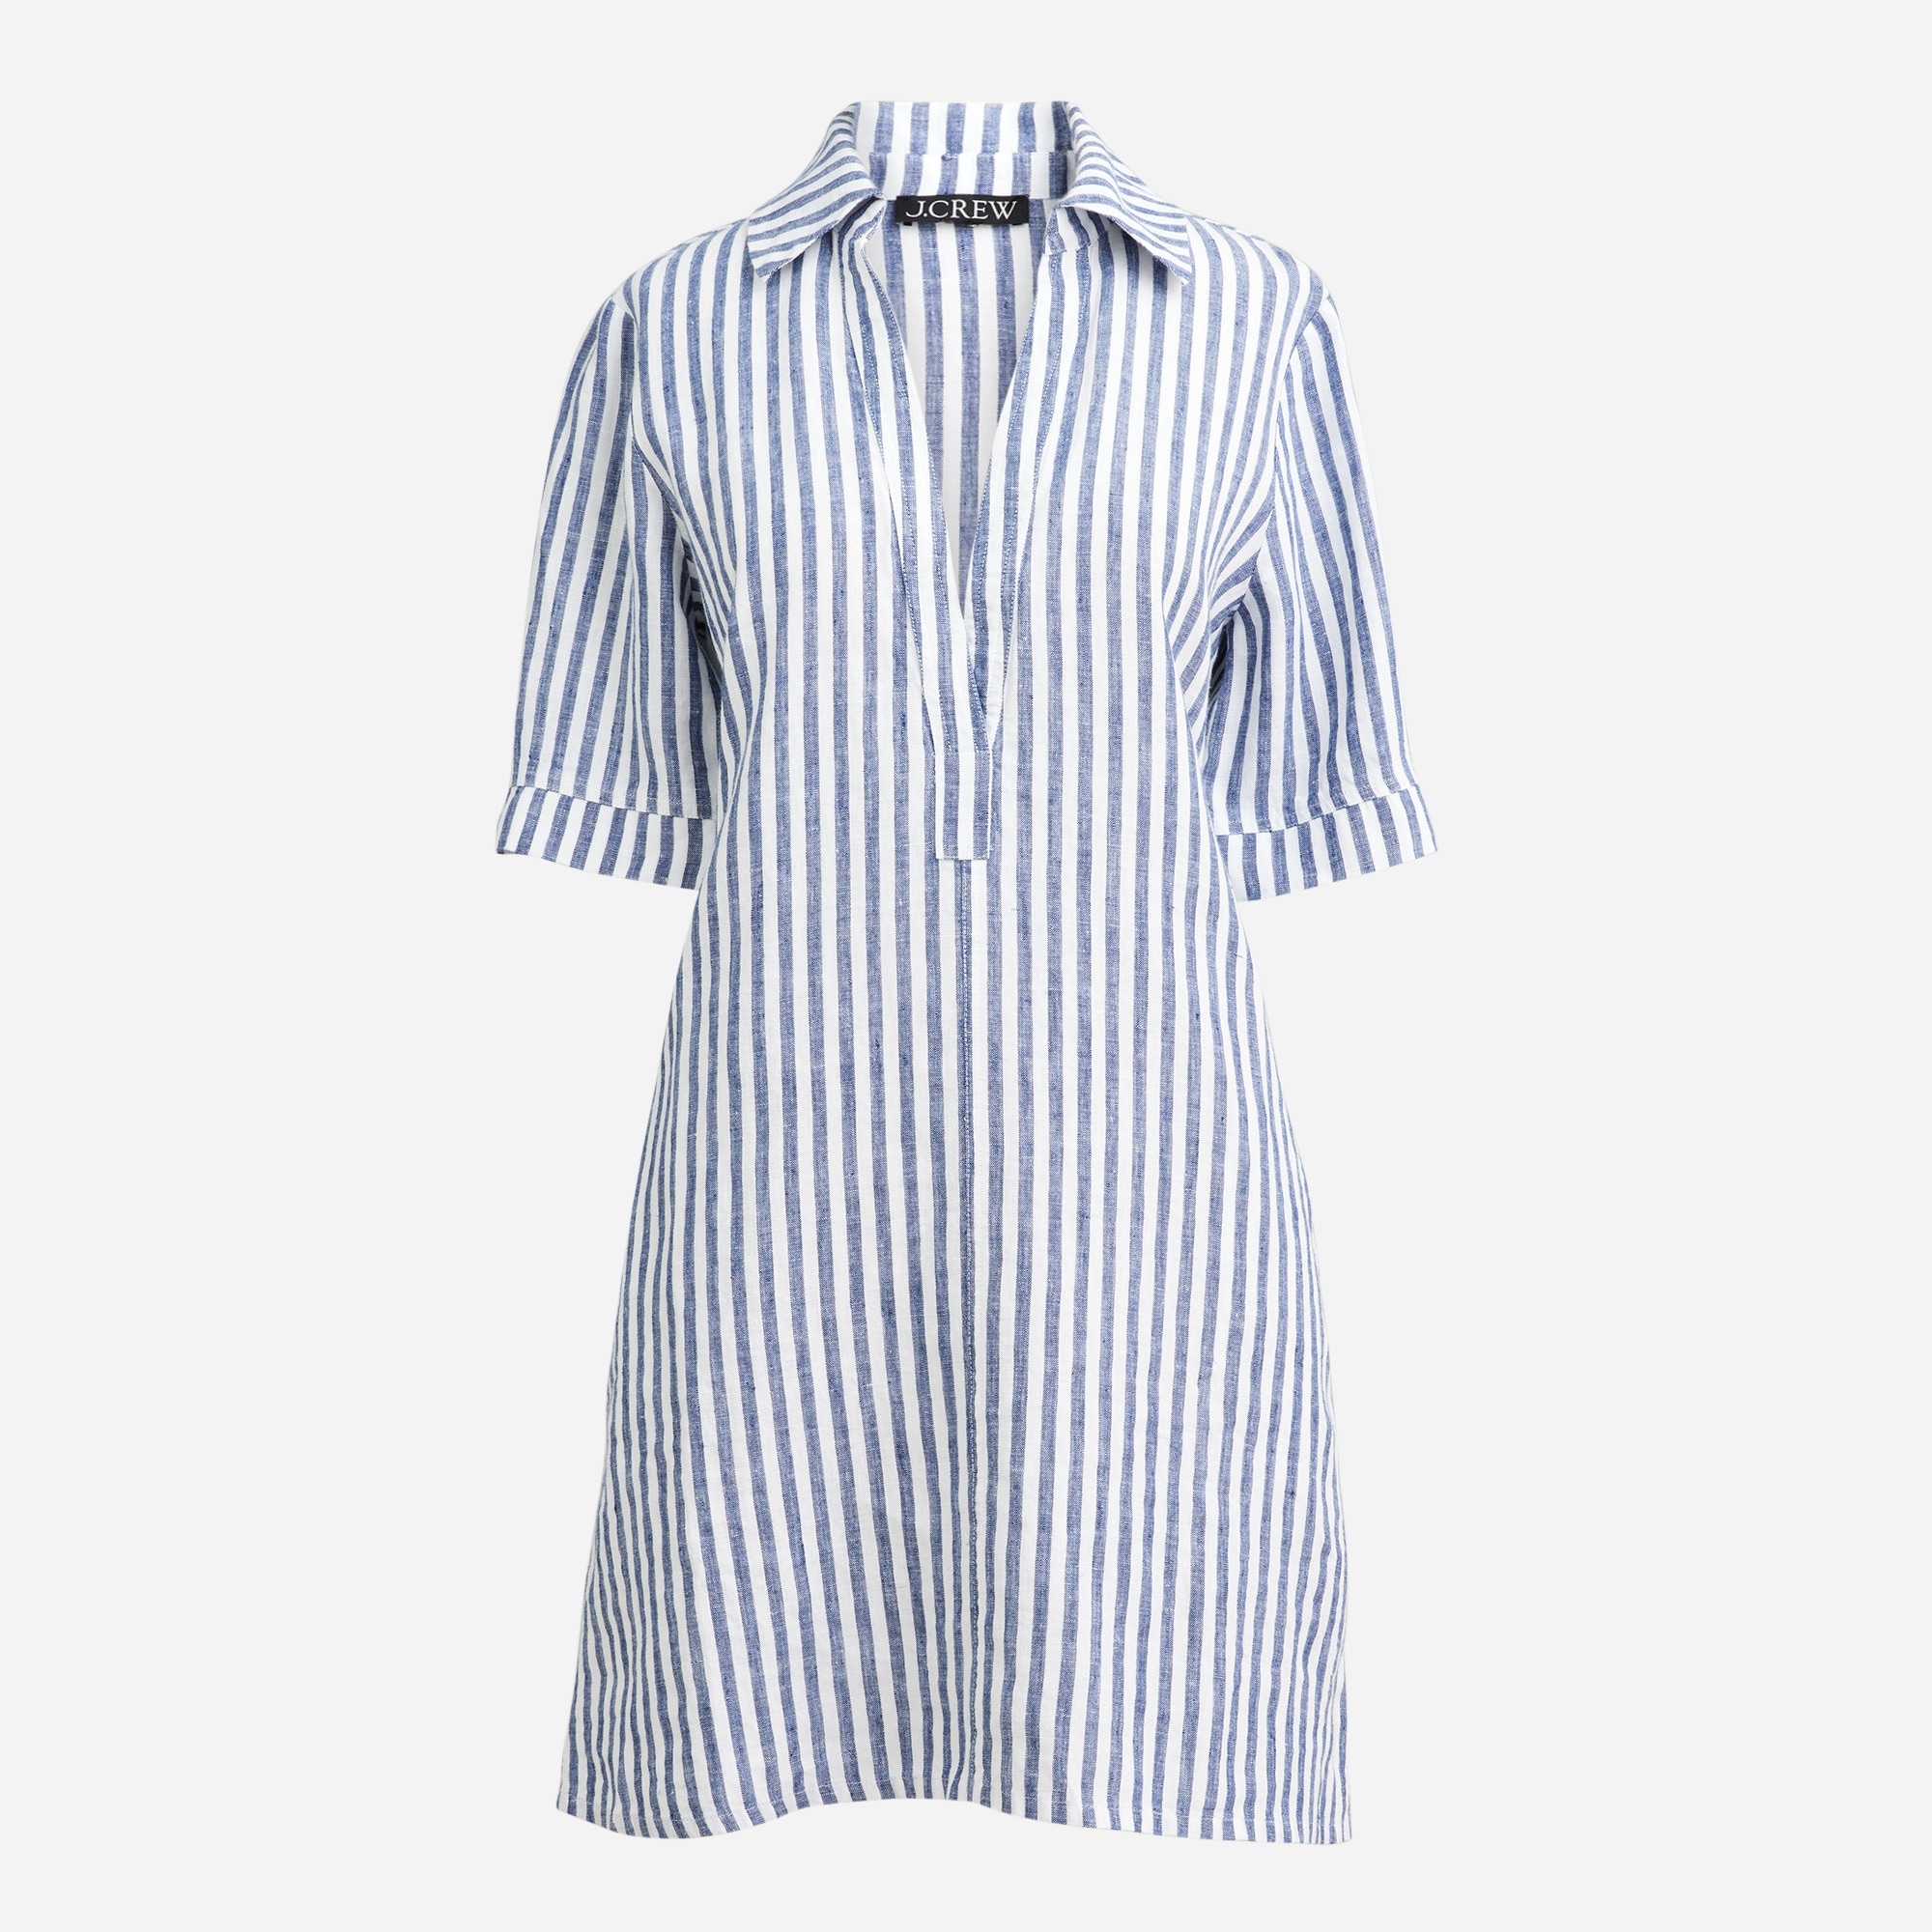  Bungalow popover dress in striped linen